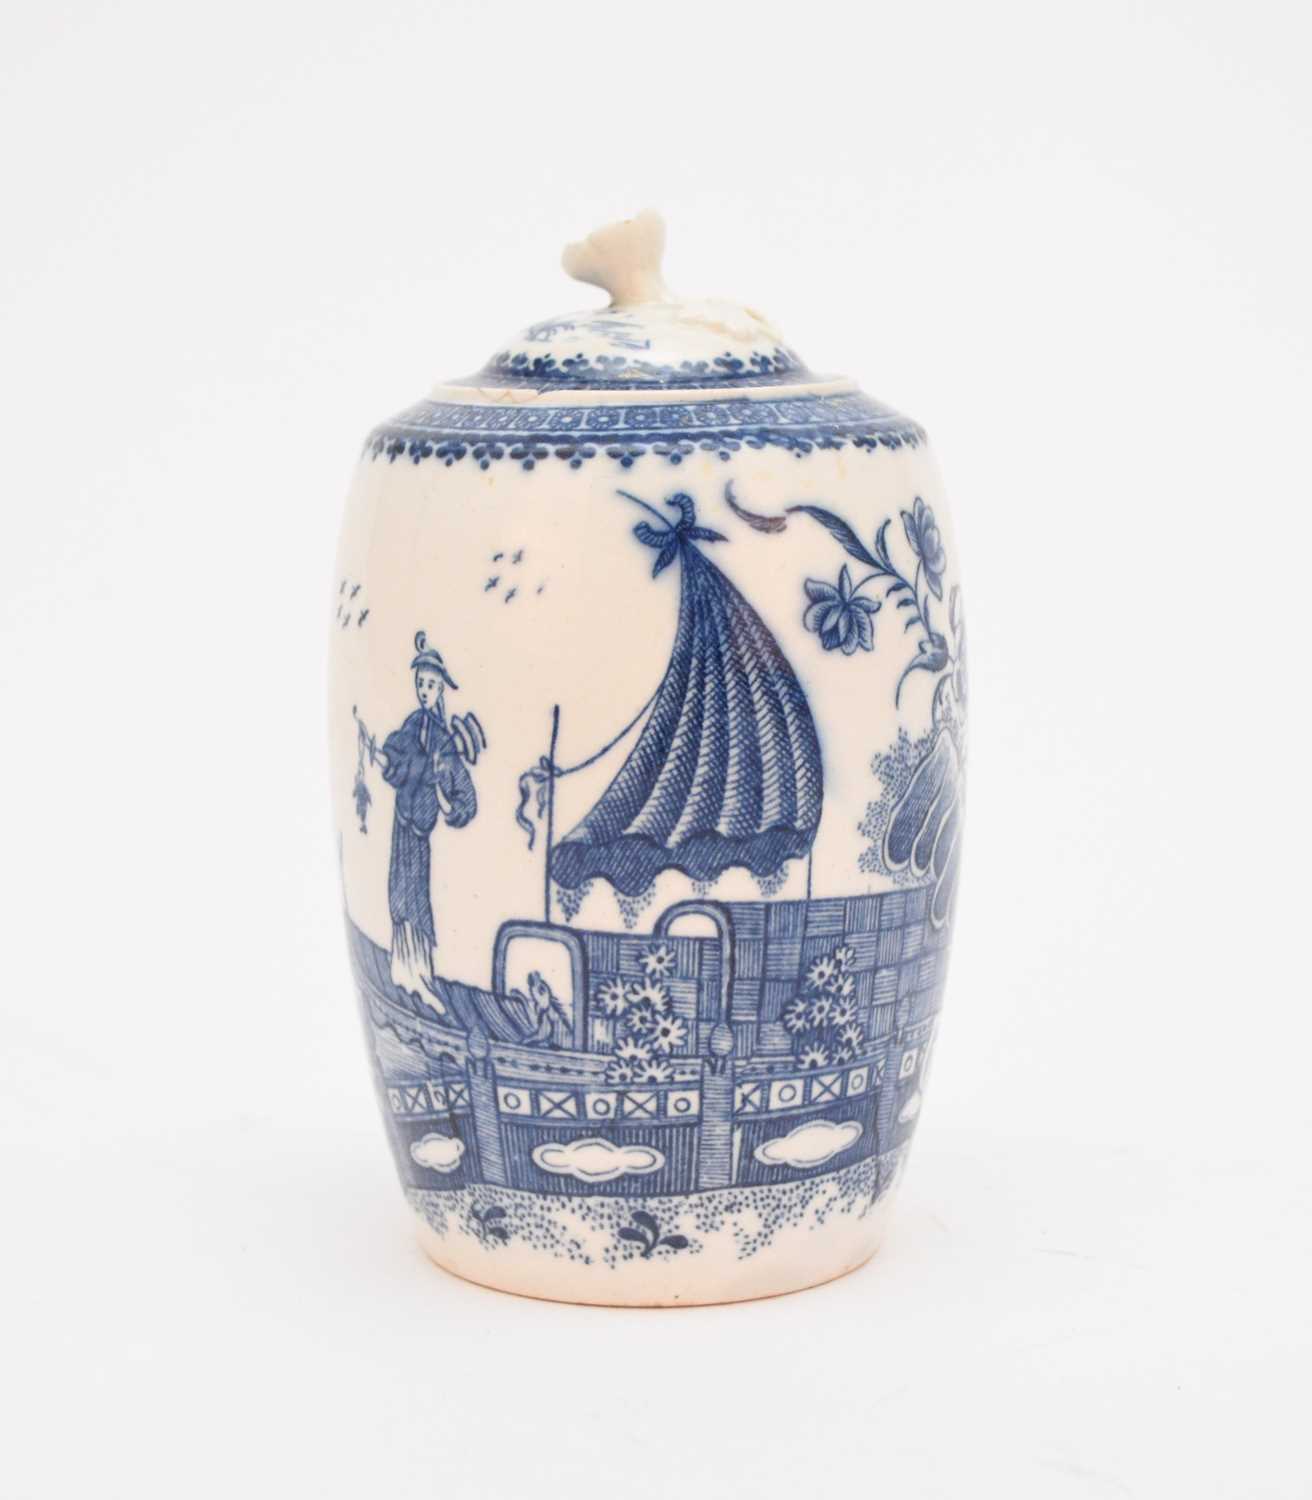 Lot 18 - Caughley 'Fisherman' tea canister and cover, circa 1780-85